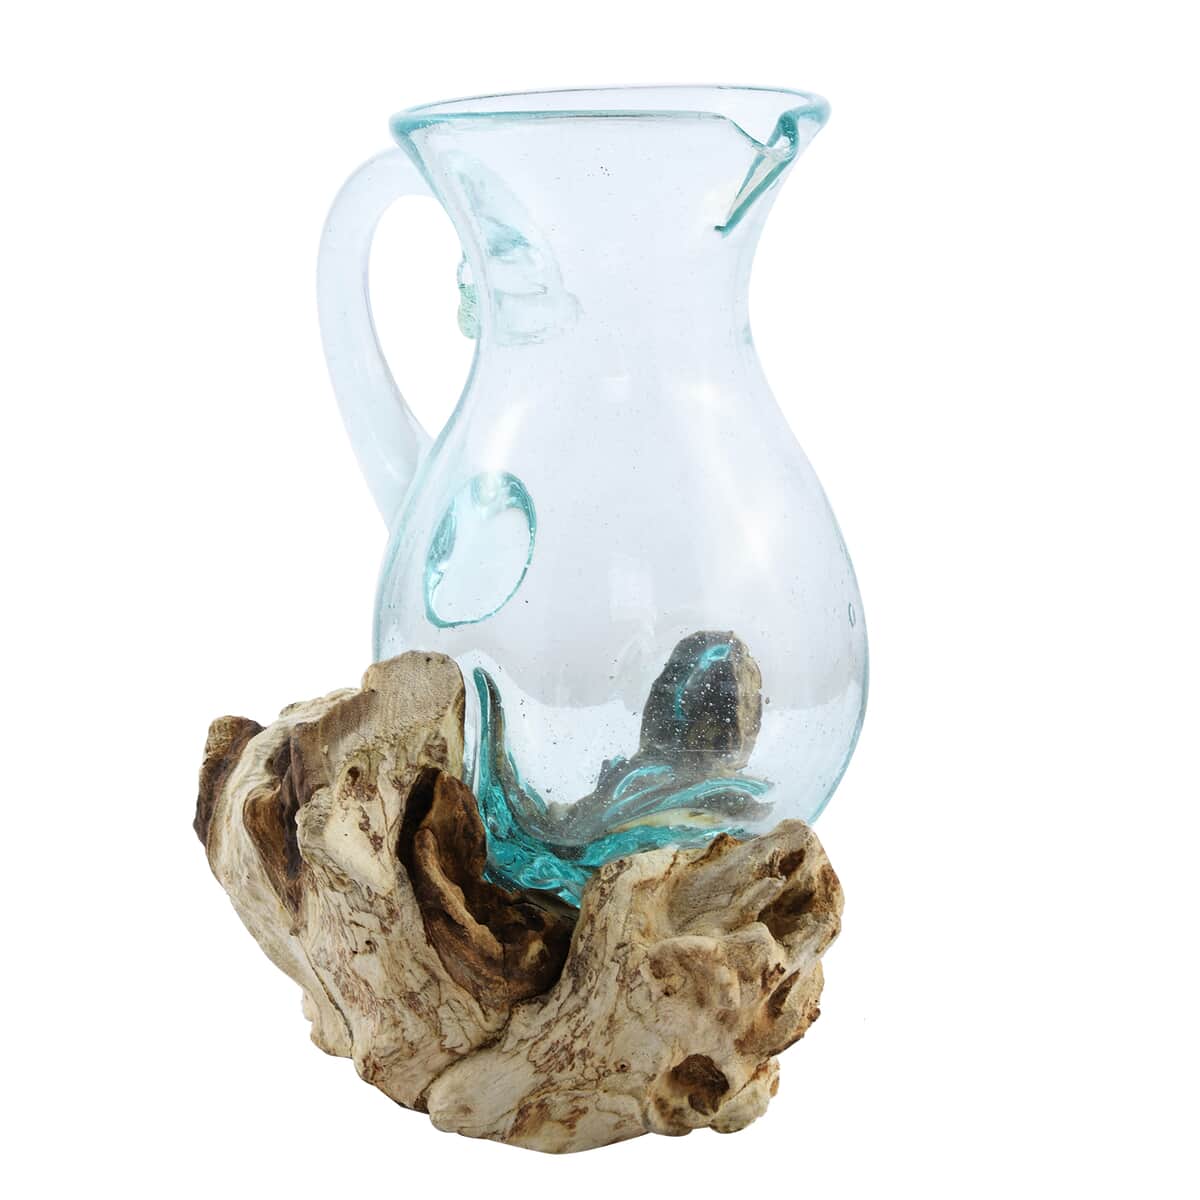 Designer Inspired Artisan Commissioned Bali Handblown Glass Pitcher with Wood Base image number 5